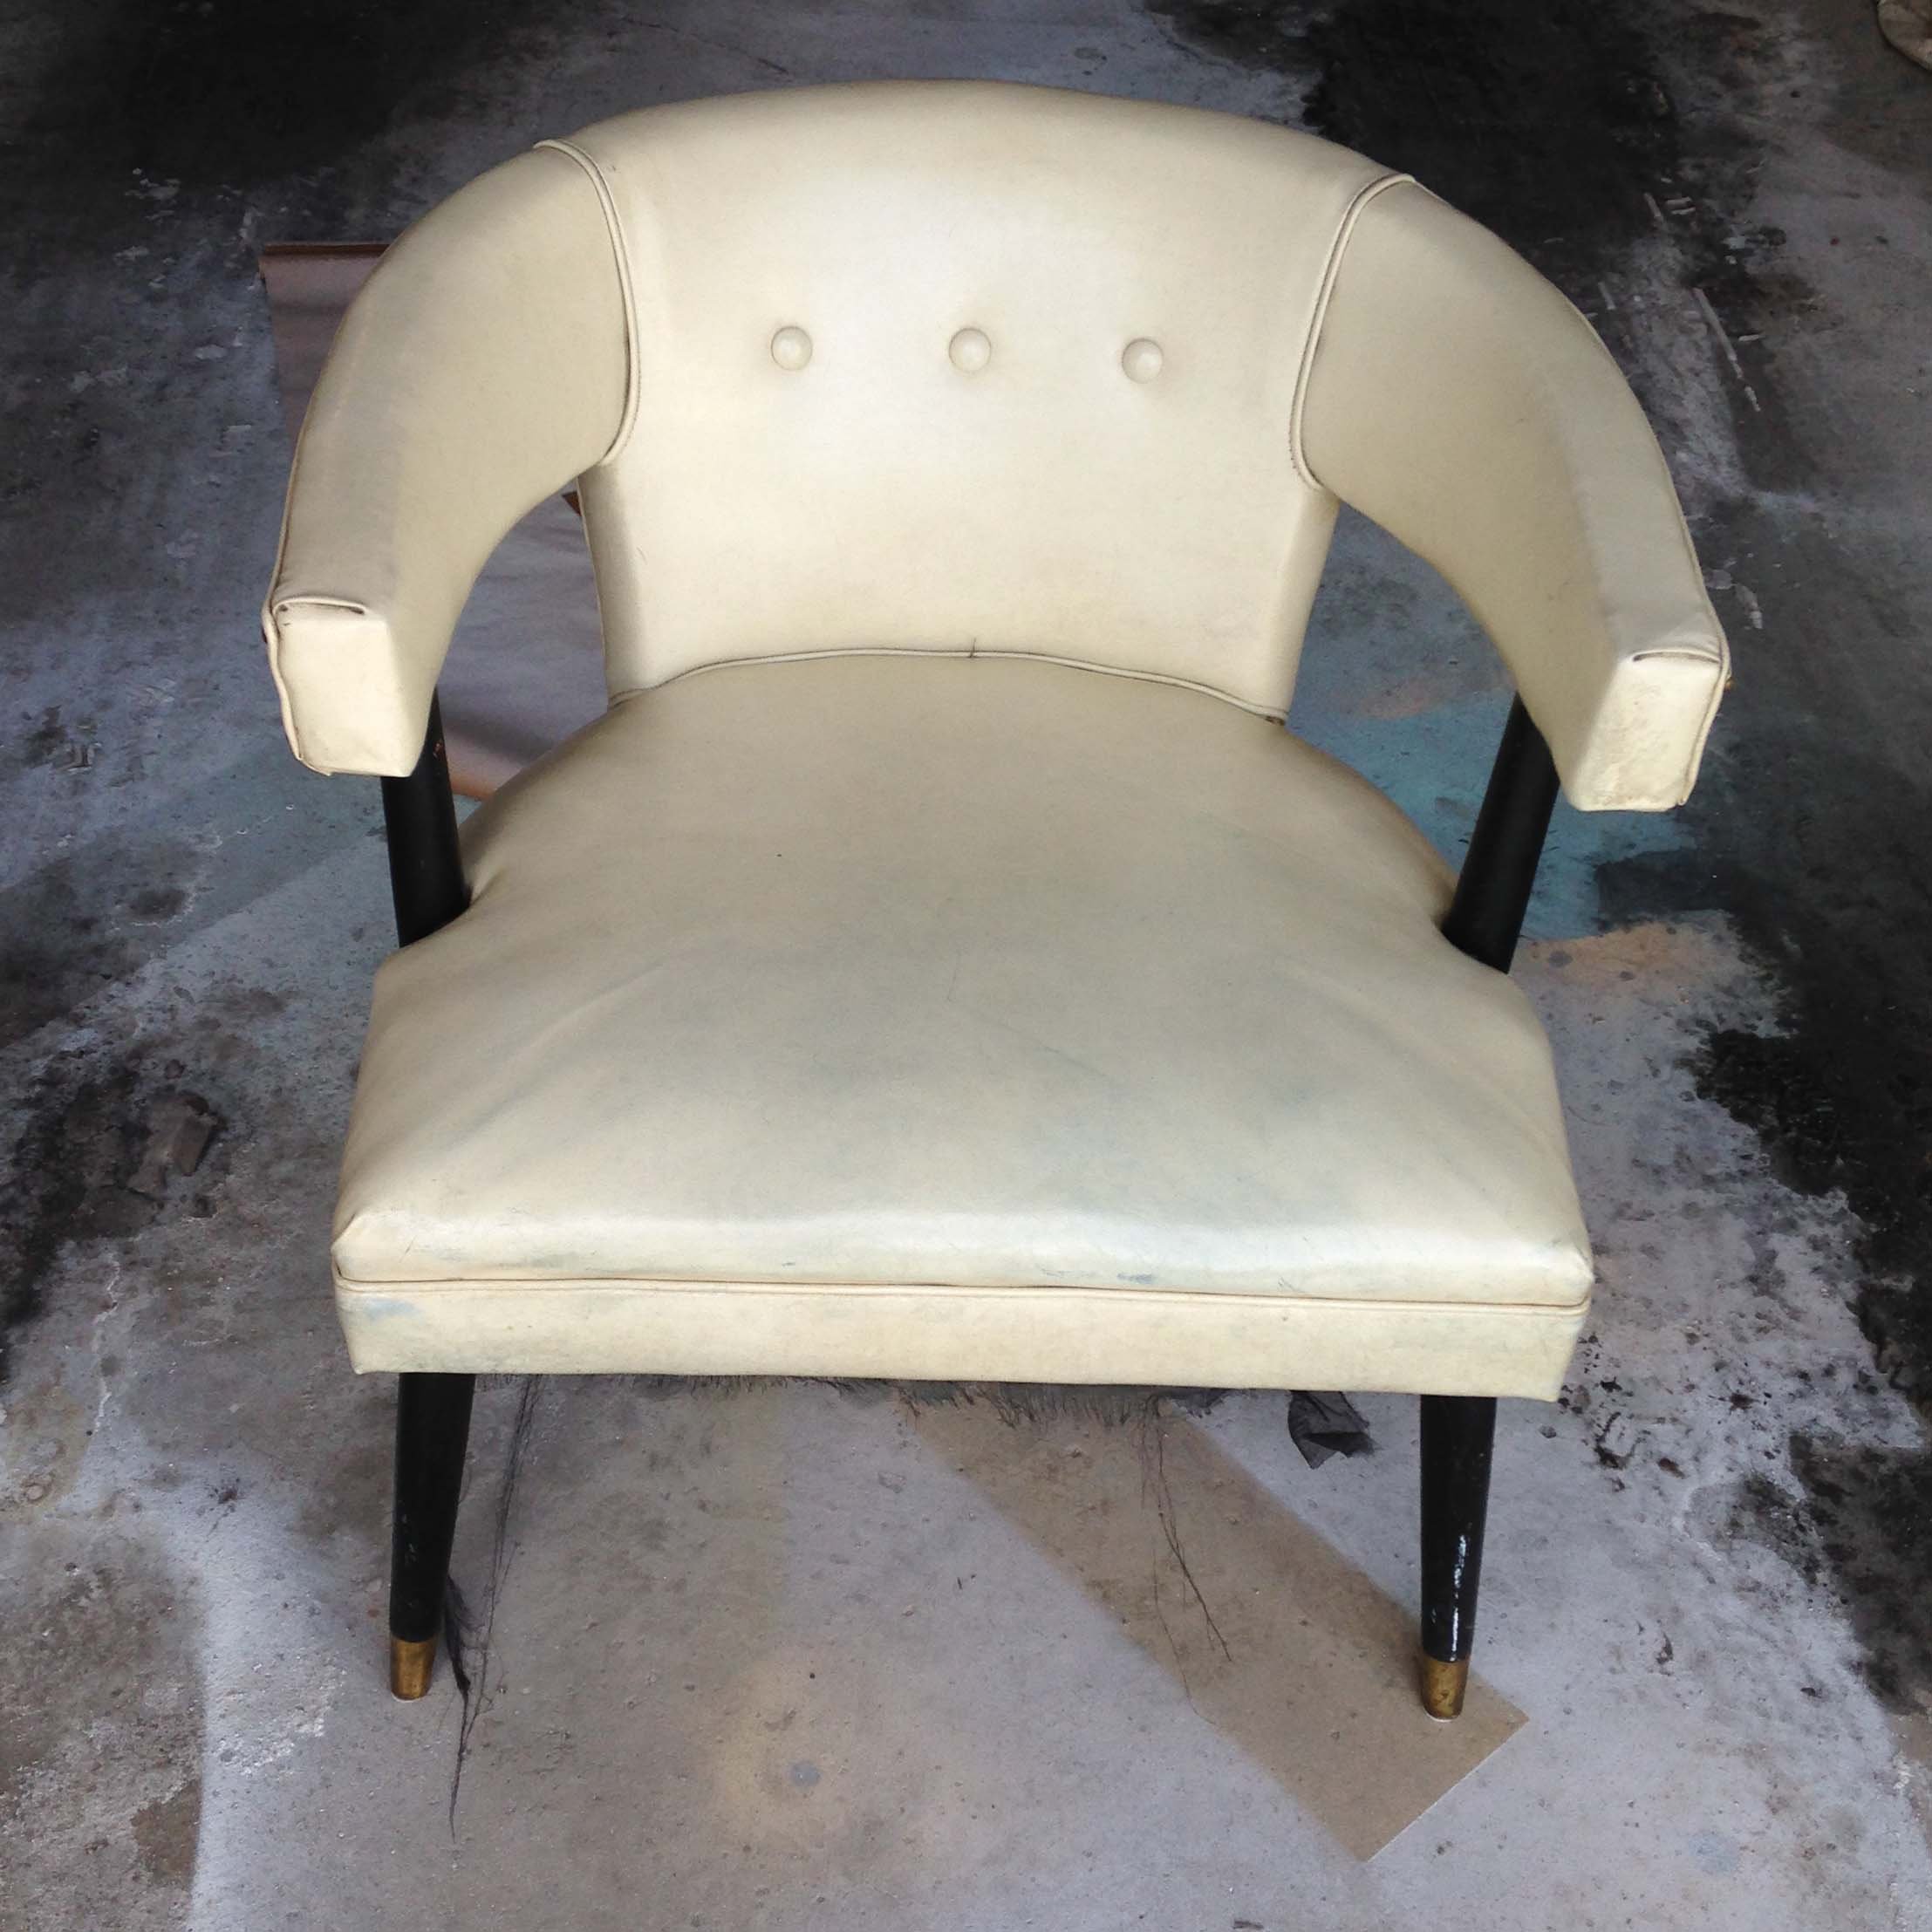 Diy Project Test Lab Results We Tried 3 Vinyl Upholstery Spray